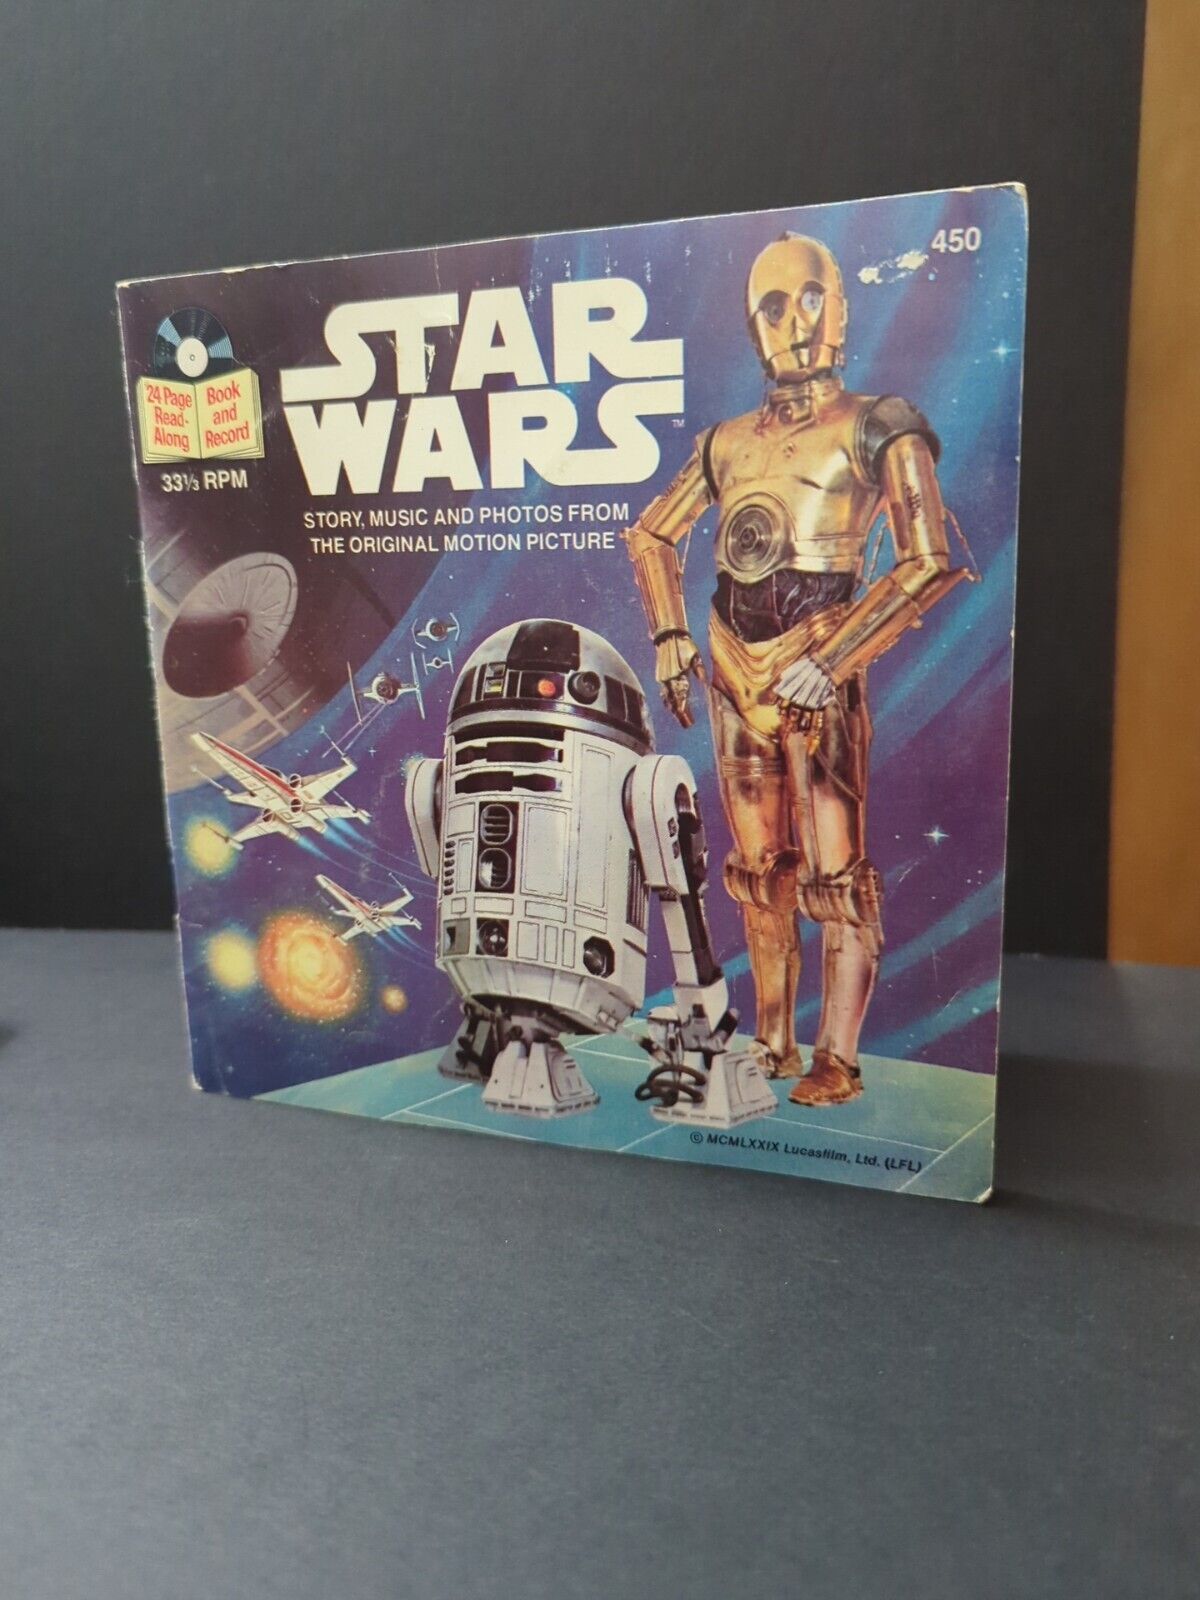 Star Wars 24 Page Read Along Book with Vinyl Record 33 1/3 RPM Untested